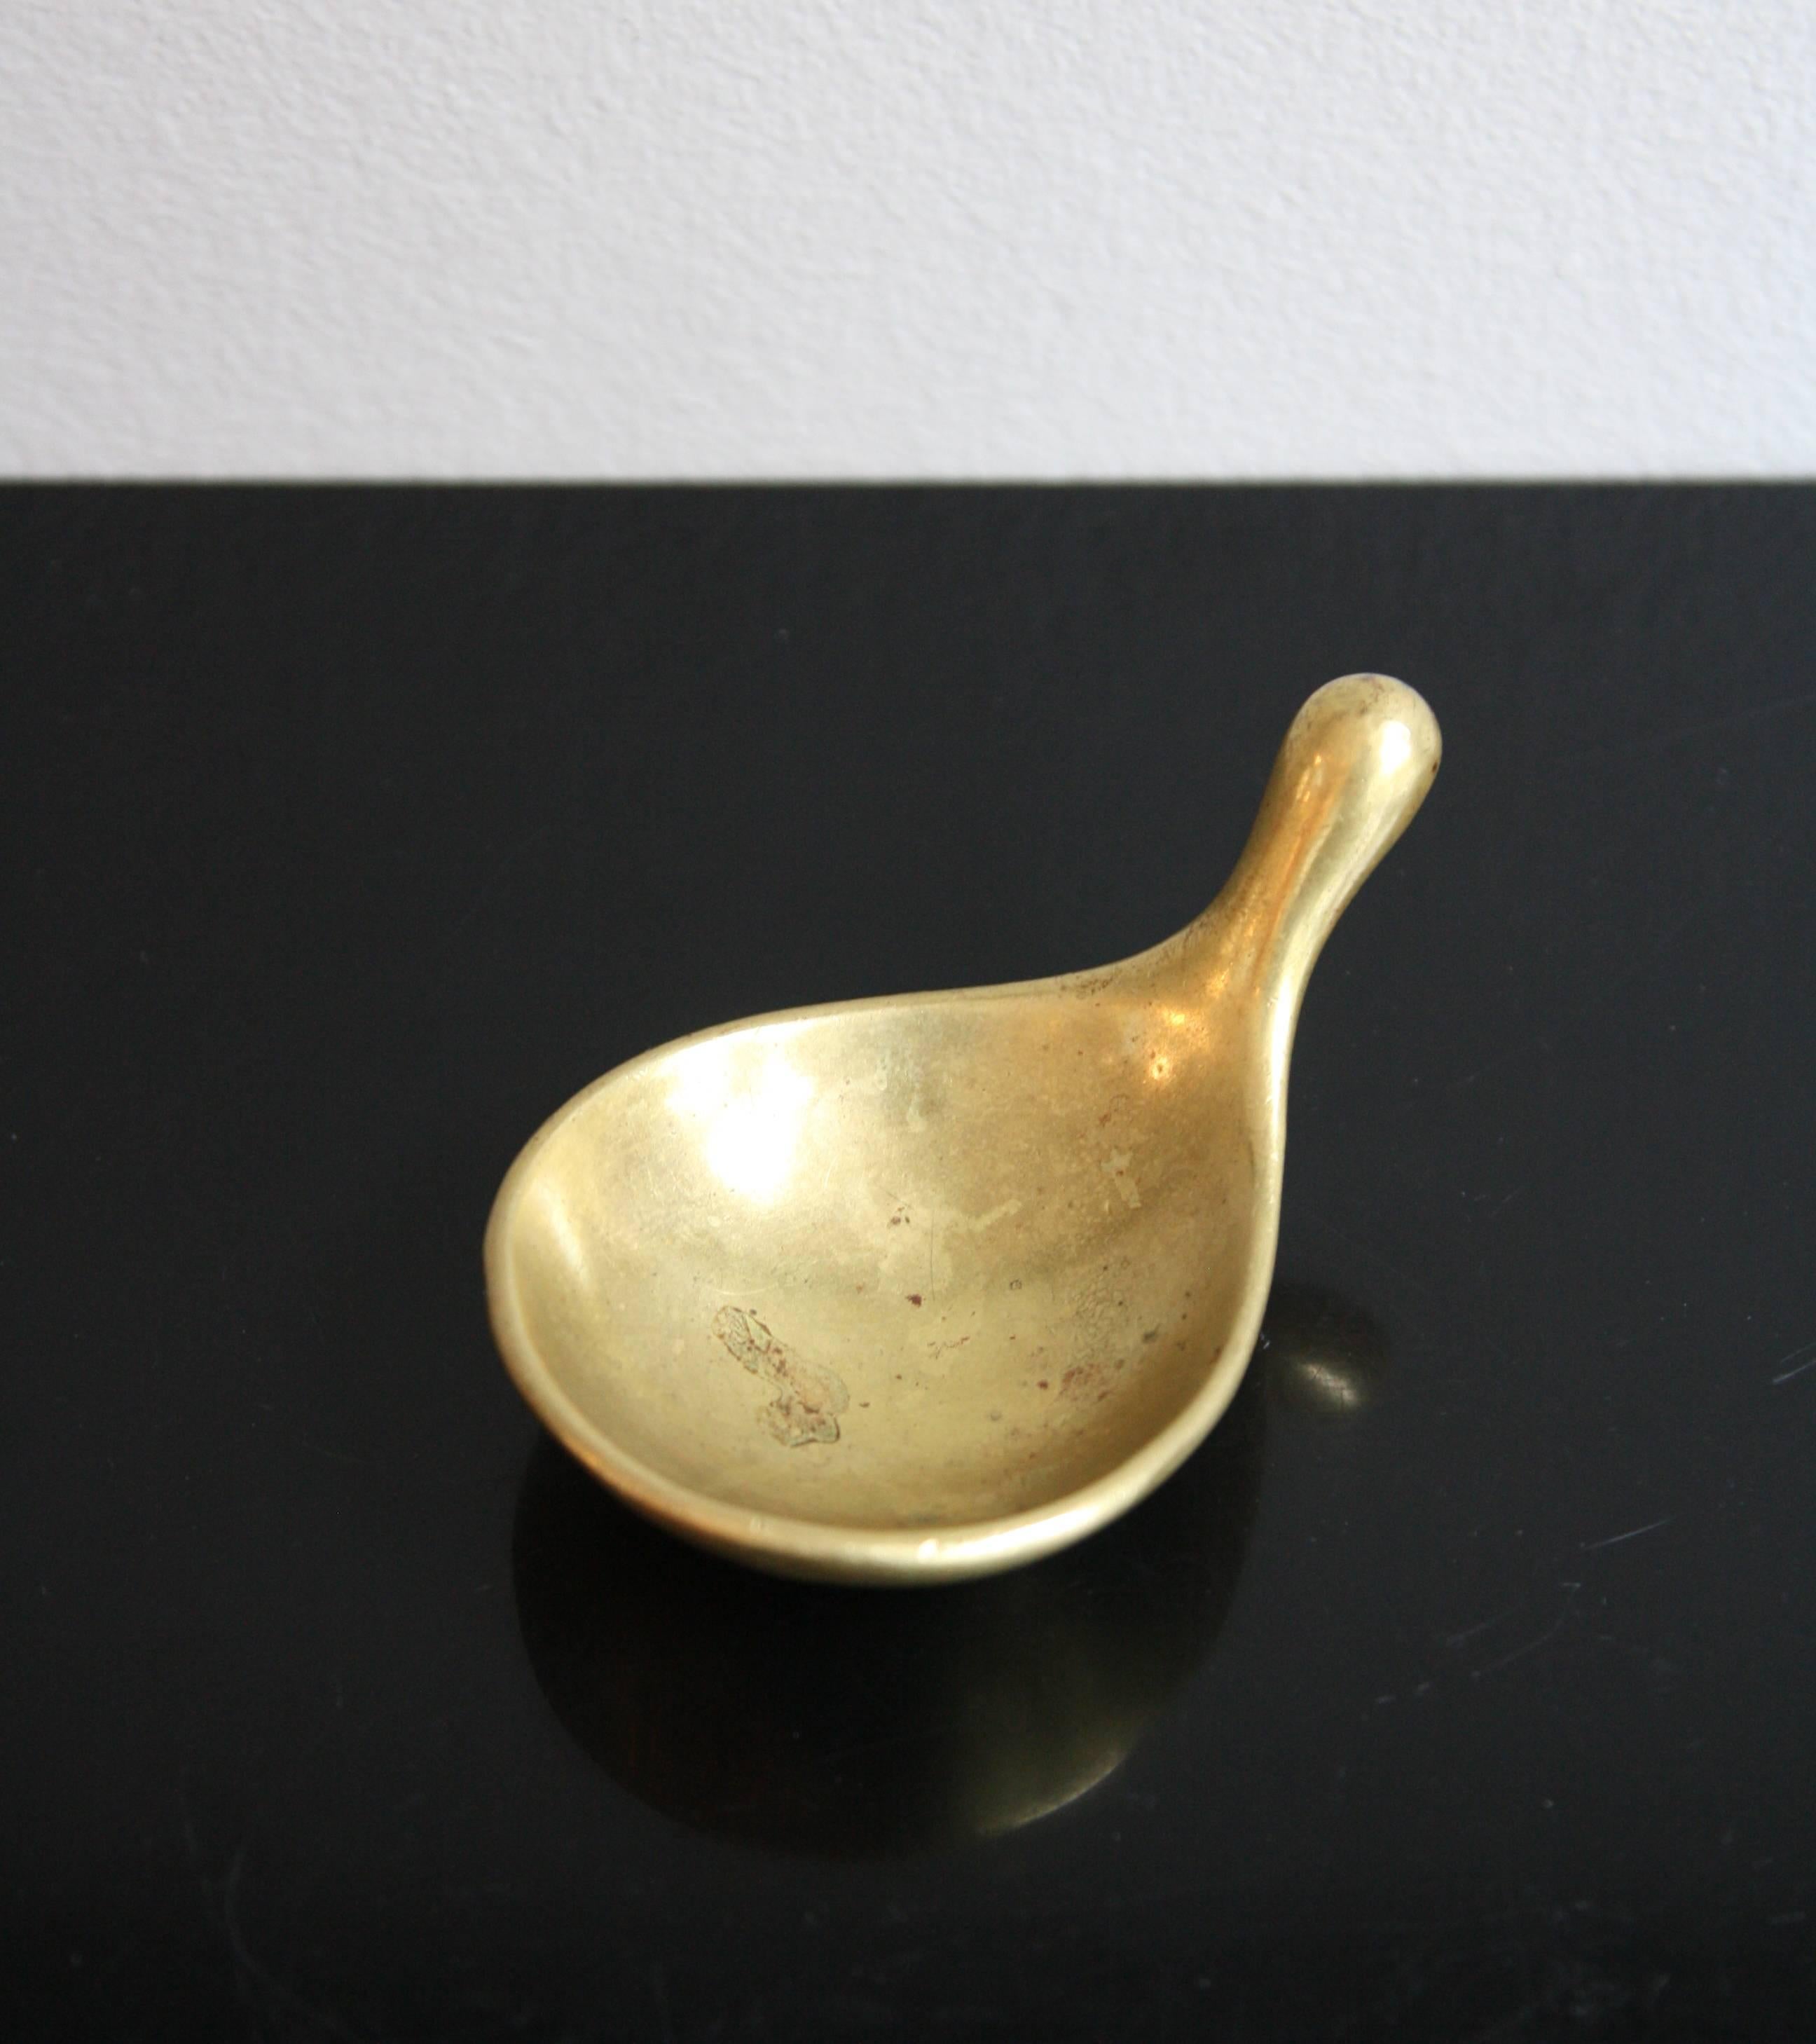 A vintage late-1940s or early-1950s solid cast brass ashtray designed and made by Carl Auböck II in Vienna, Austria. The petite ashtray is extremely organic in shape and tactile, it becomes obvious on picking the piece up that it is meant to be